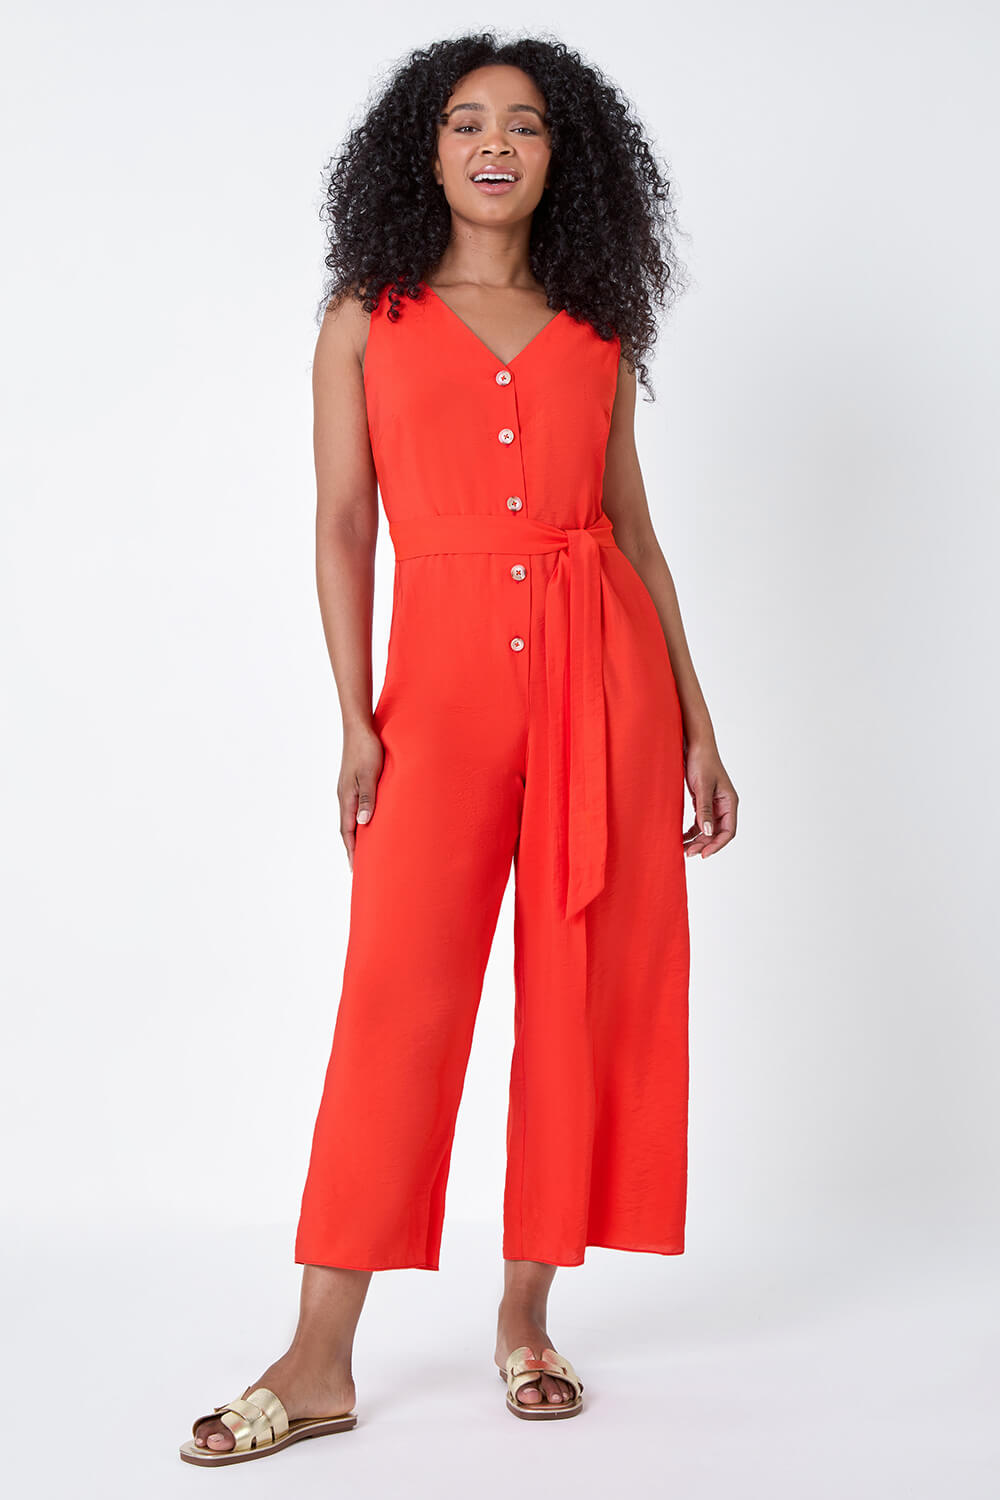 CORAL Petite Sleeveless Button Front Jumpsuit, Image 2 of 5